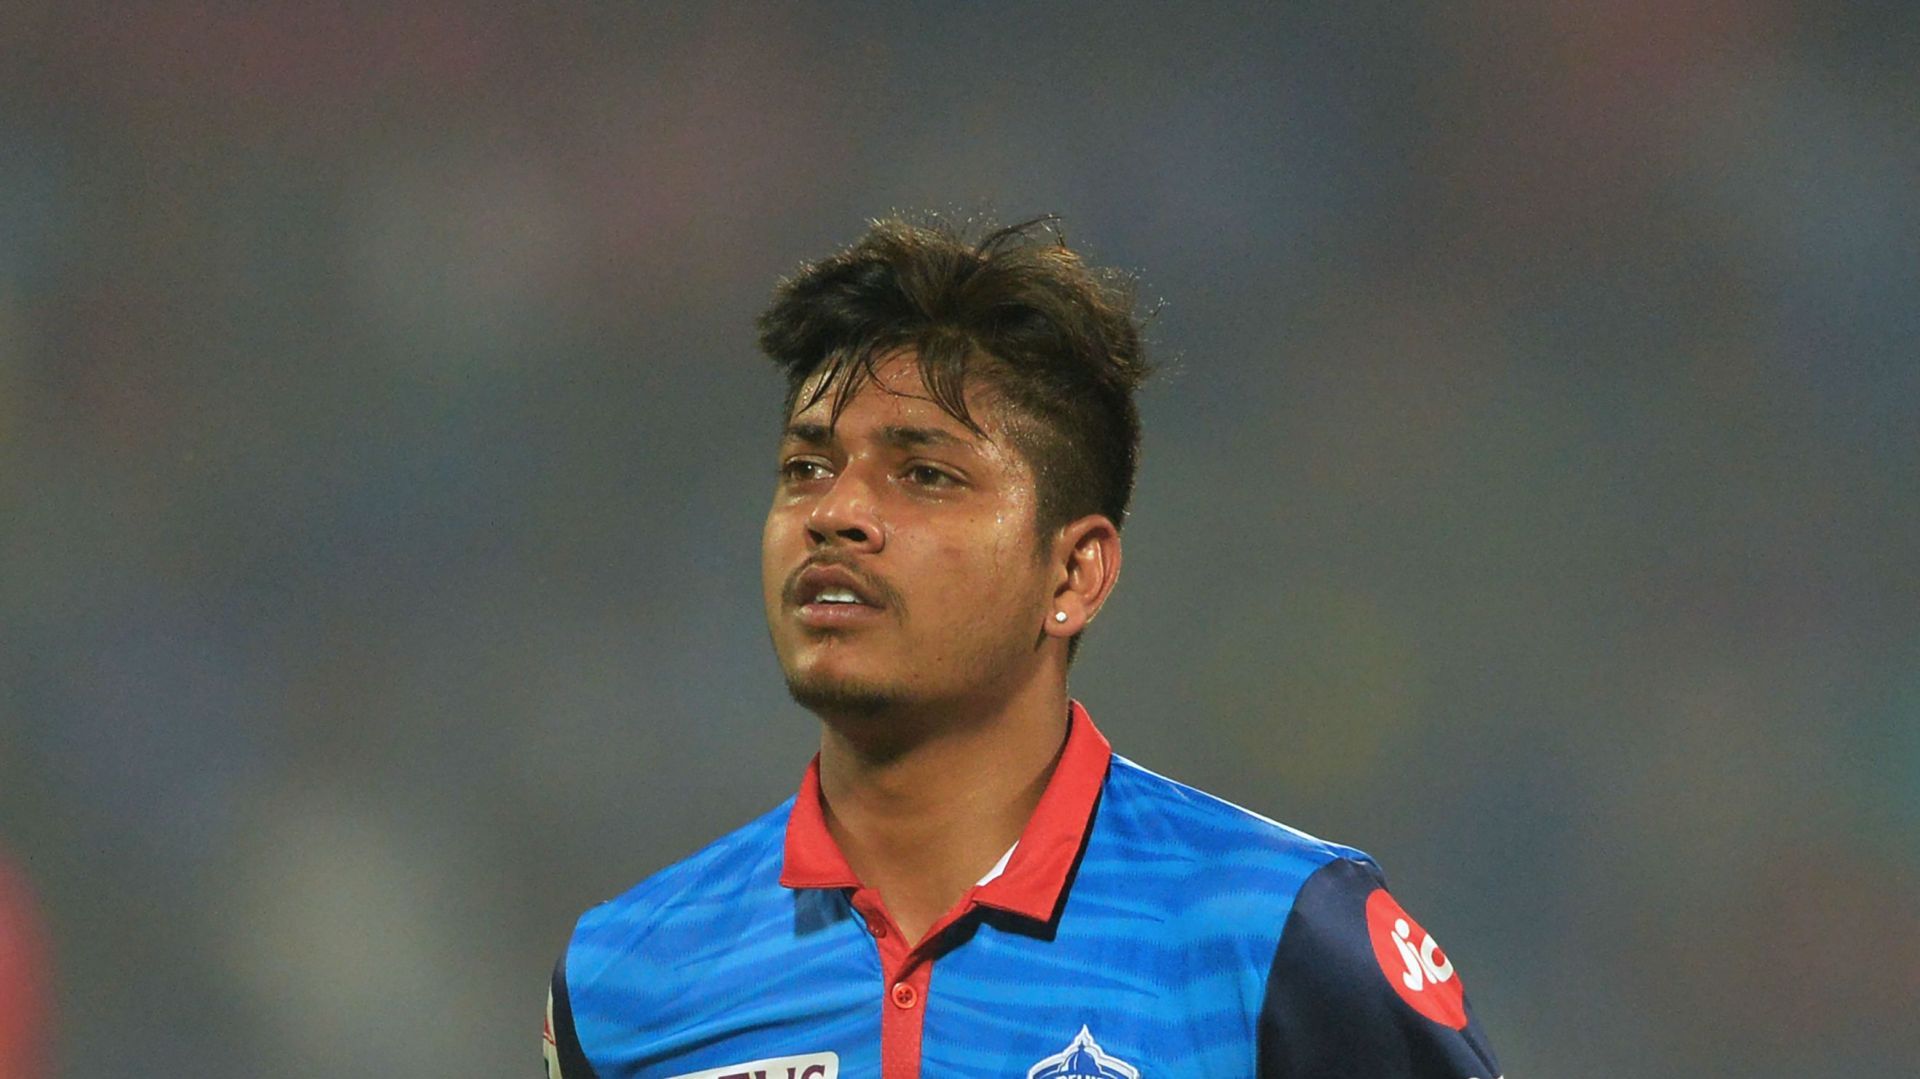 Sandeep Lamichhane will be the only player from Nepal at the 2022 IPL auction